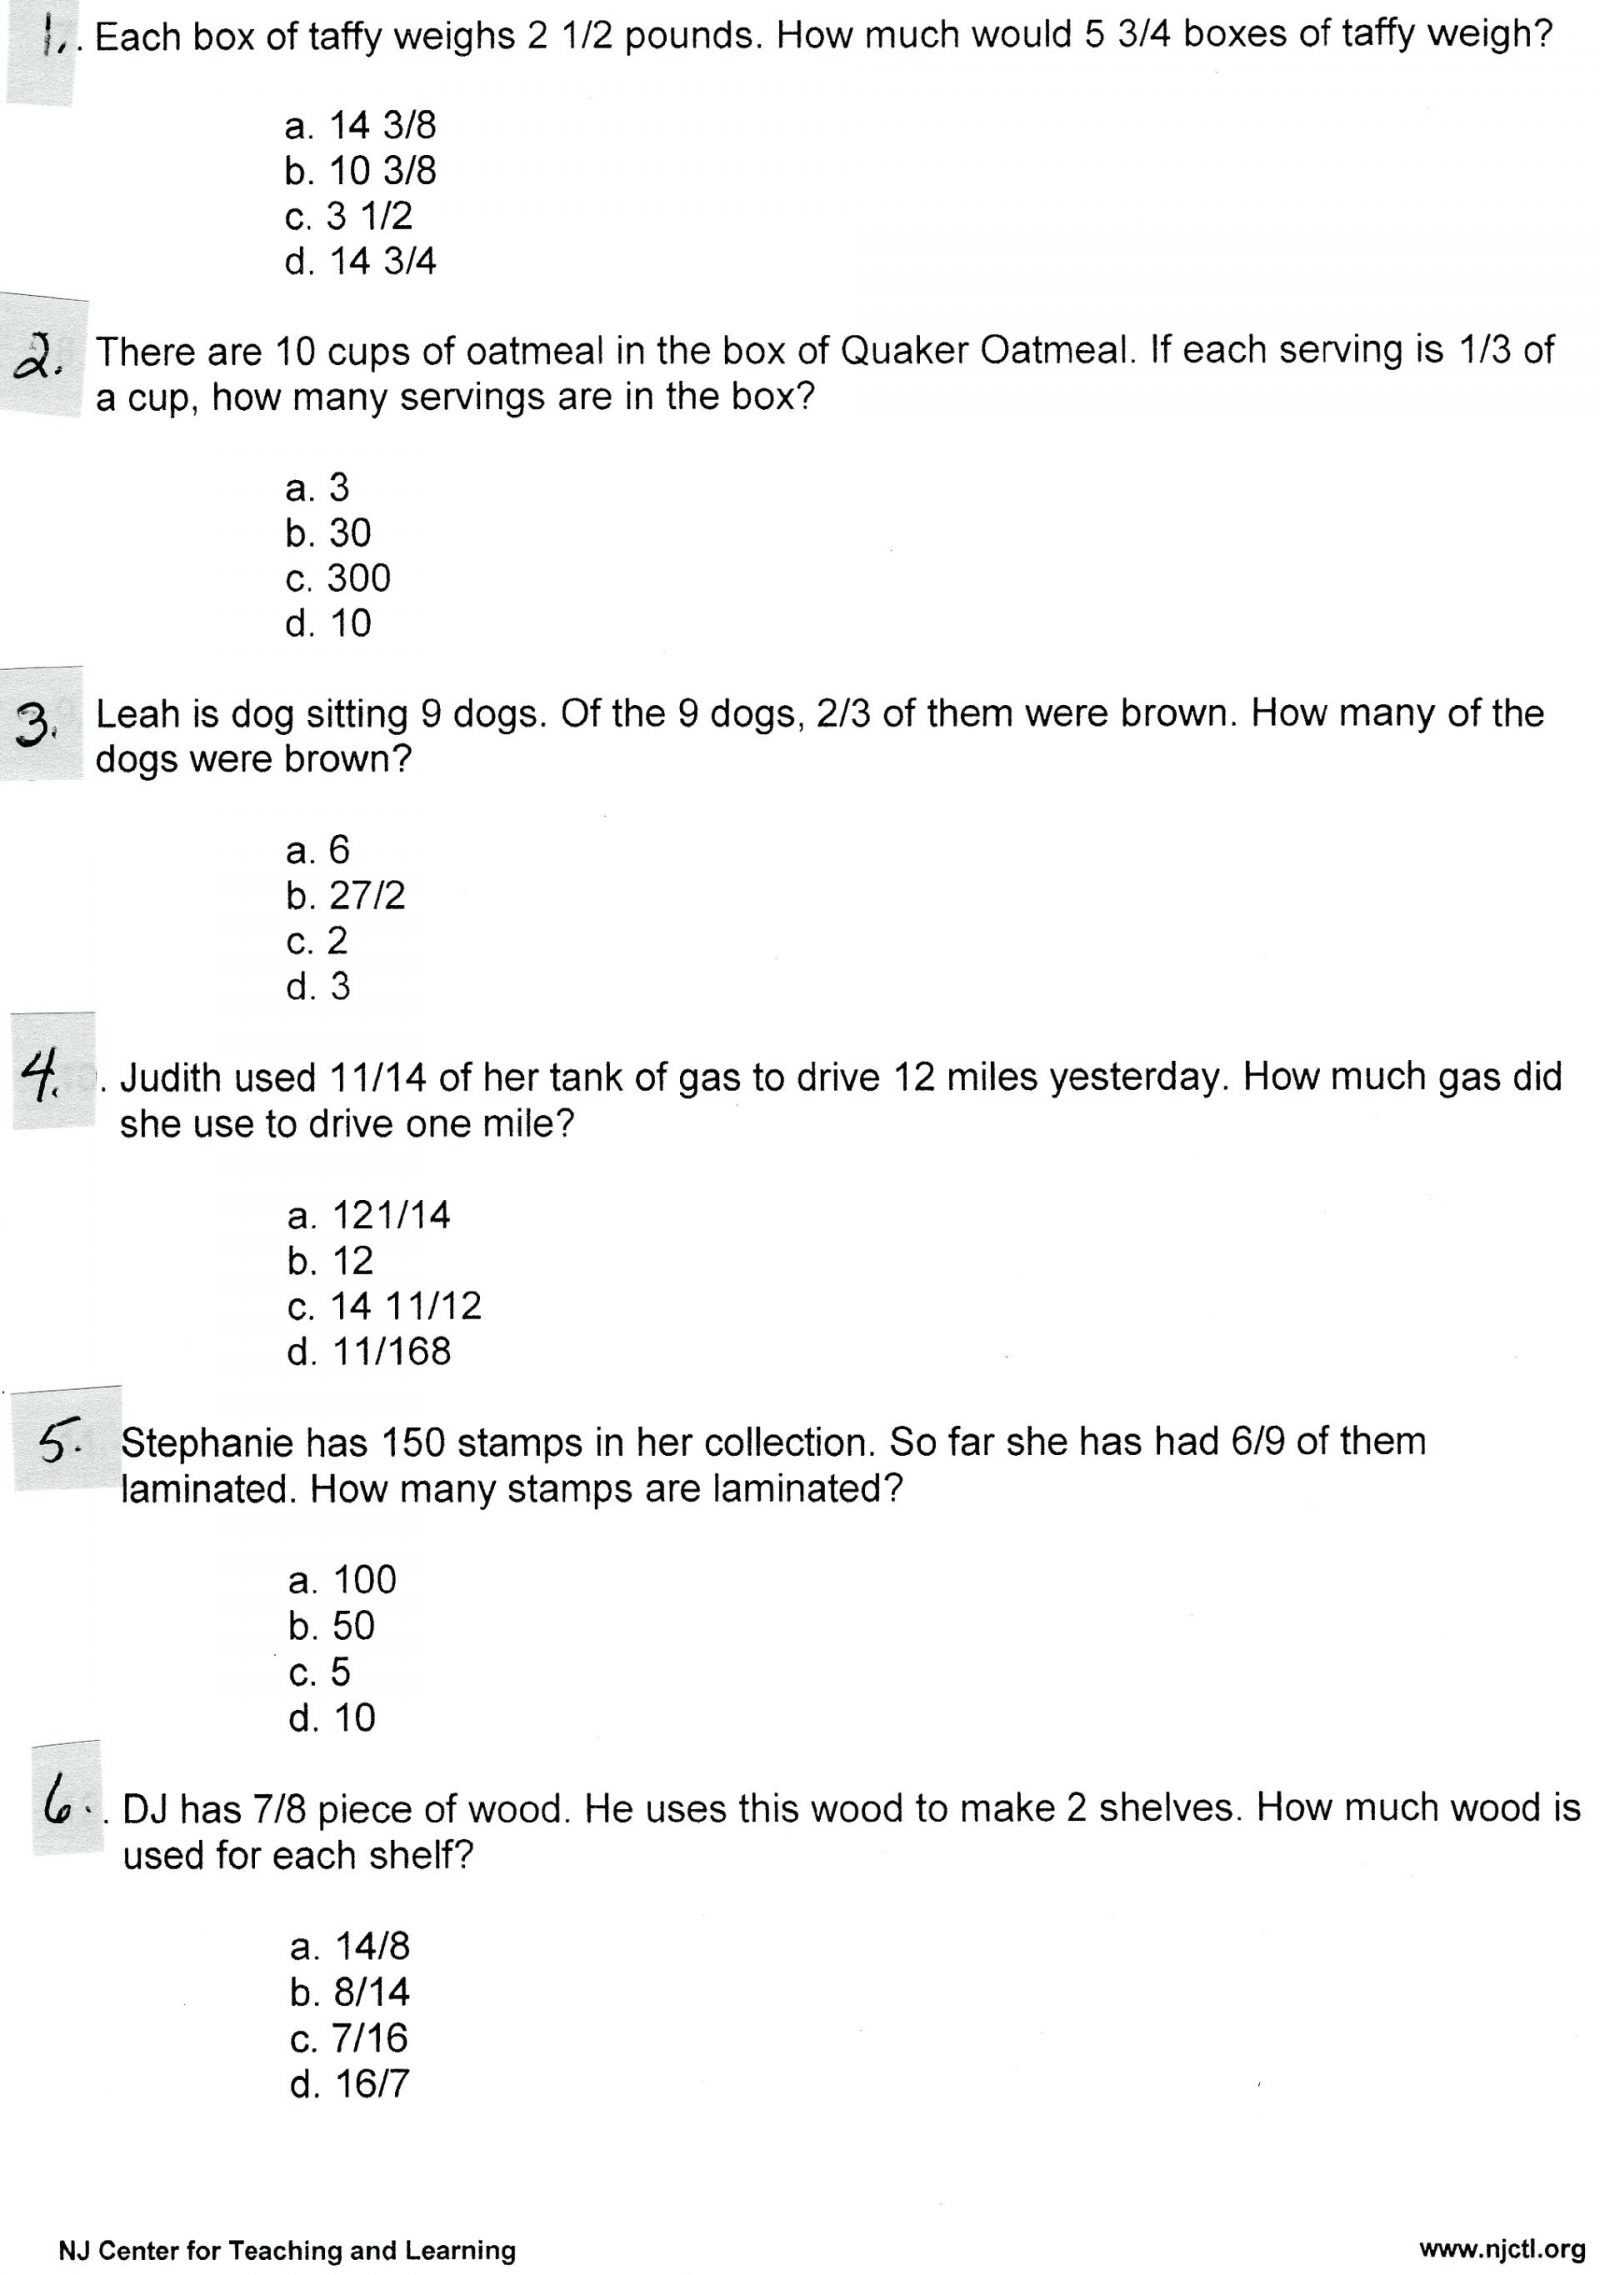 7th Grade Math Word Problems Worksheets Along with Putation with whole Numbers Worksheet New Worksheets 3rd Grade